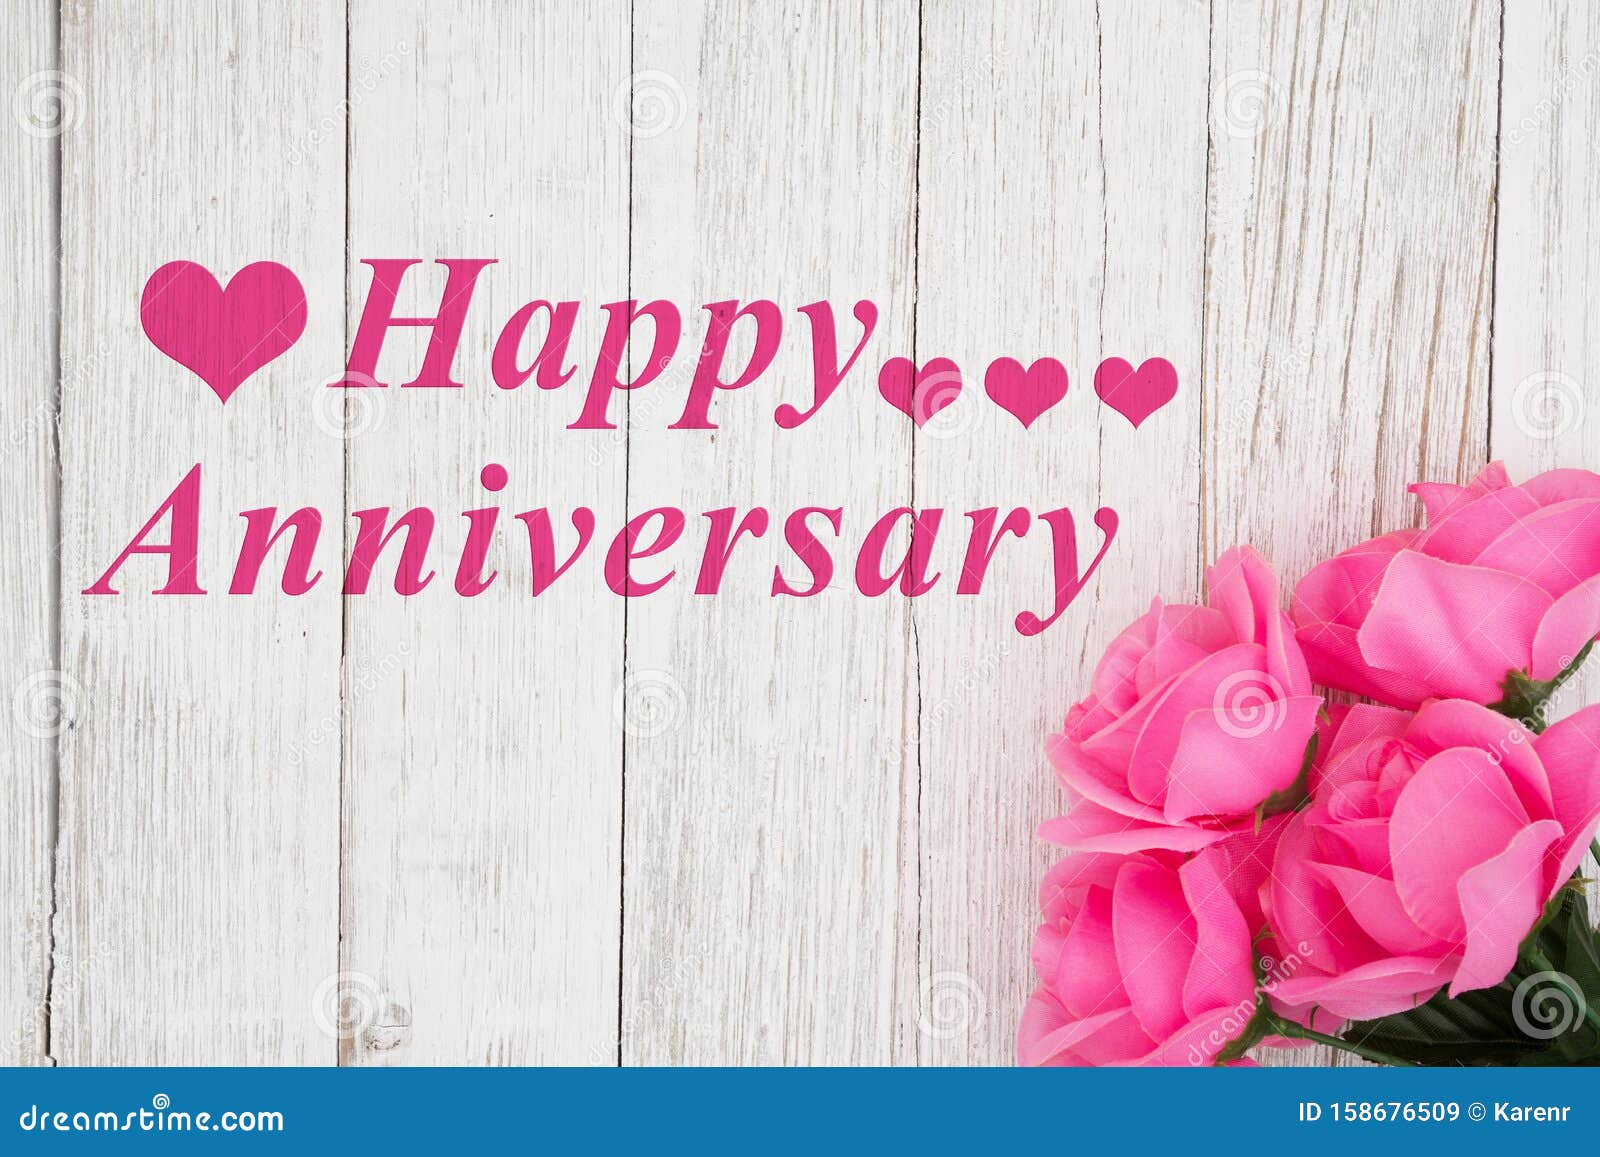 Happy Anniversary Greeting with Roses Stock Image - Image of ...